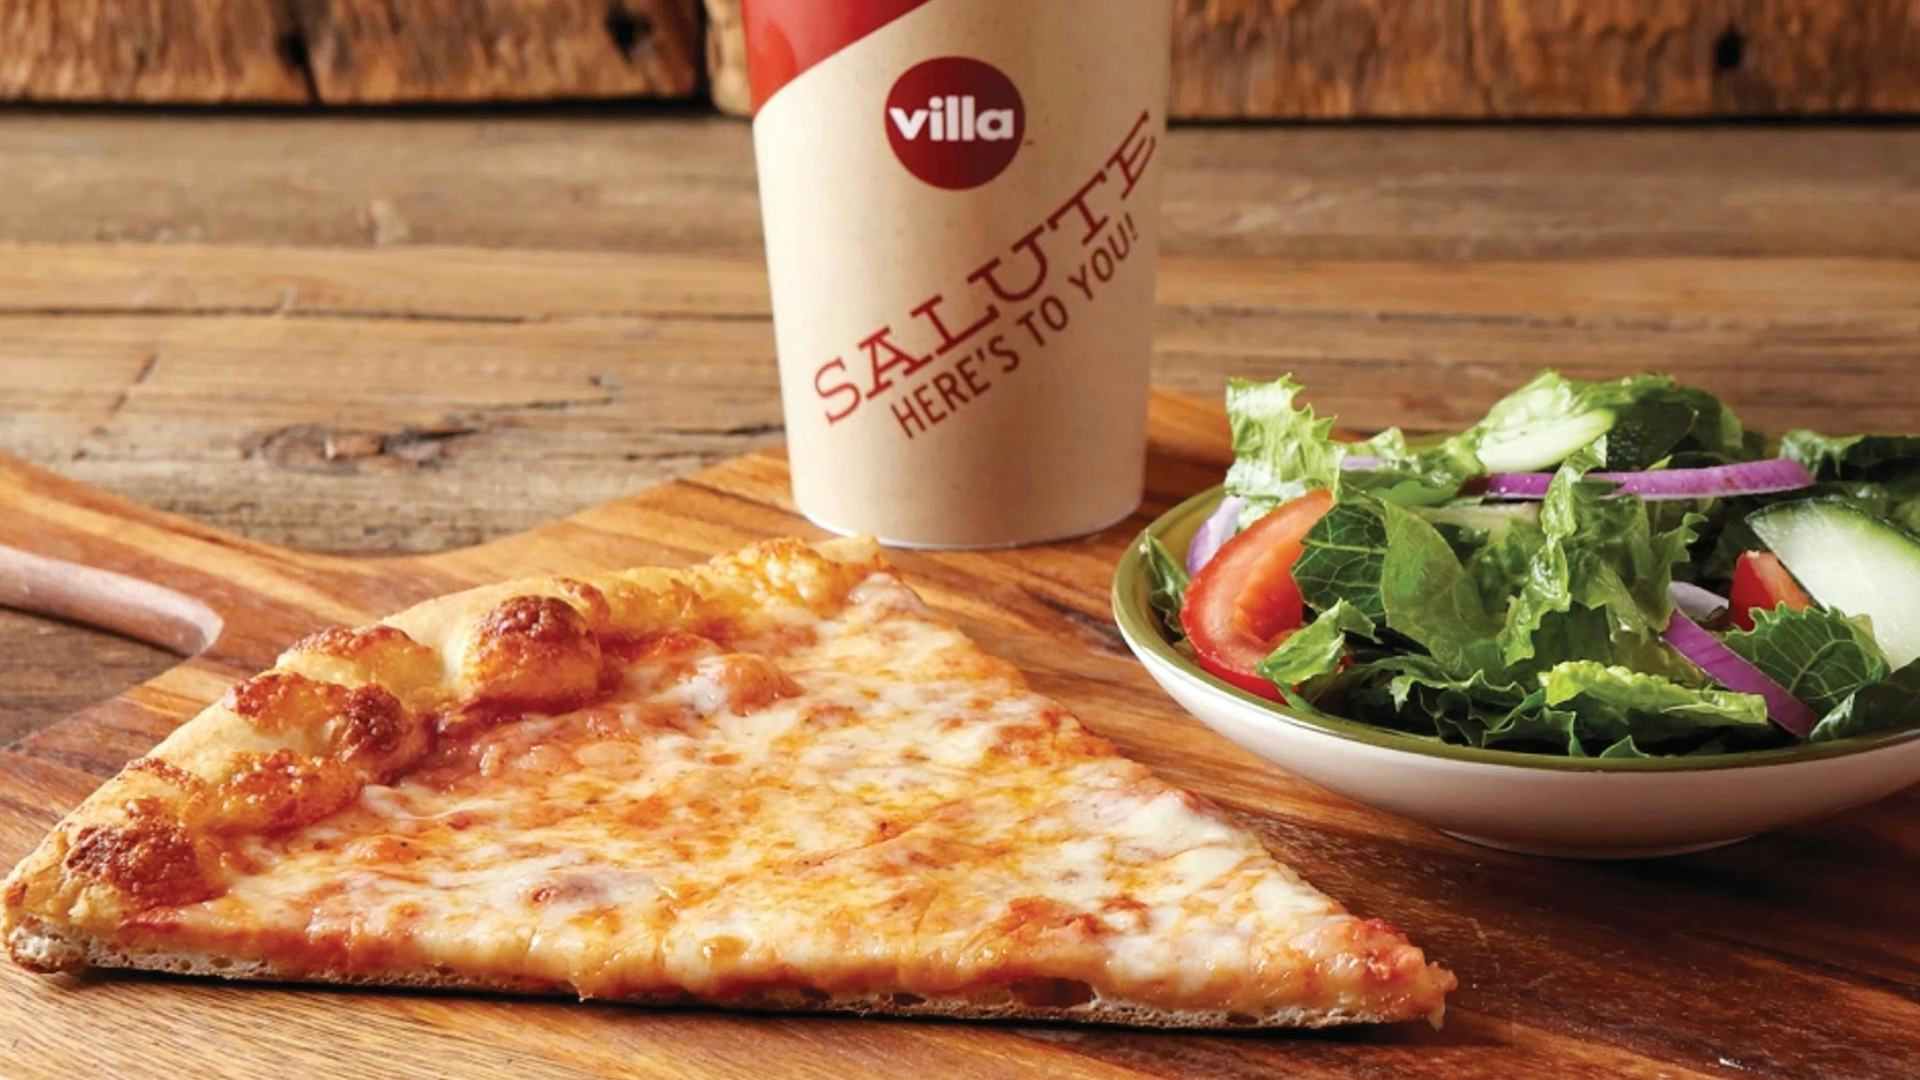 A slice of pizza, salad, and soft drink from Villa Italian Kitchen